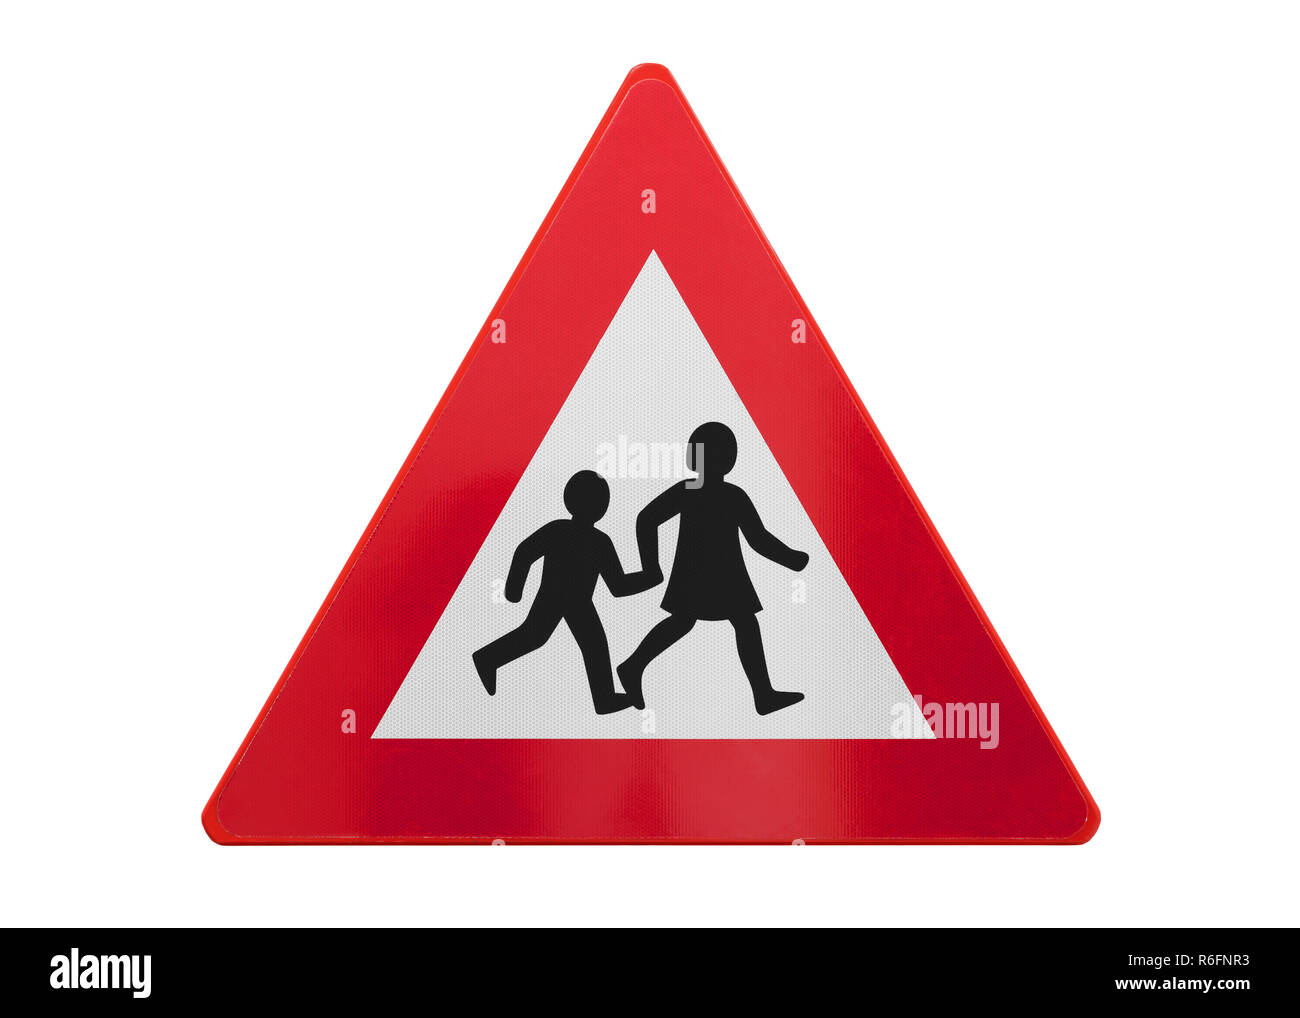 Traffic sign isolated - Children playing or crossing - On white Stock Photo